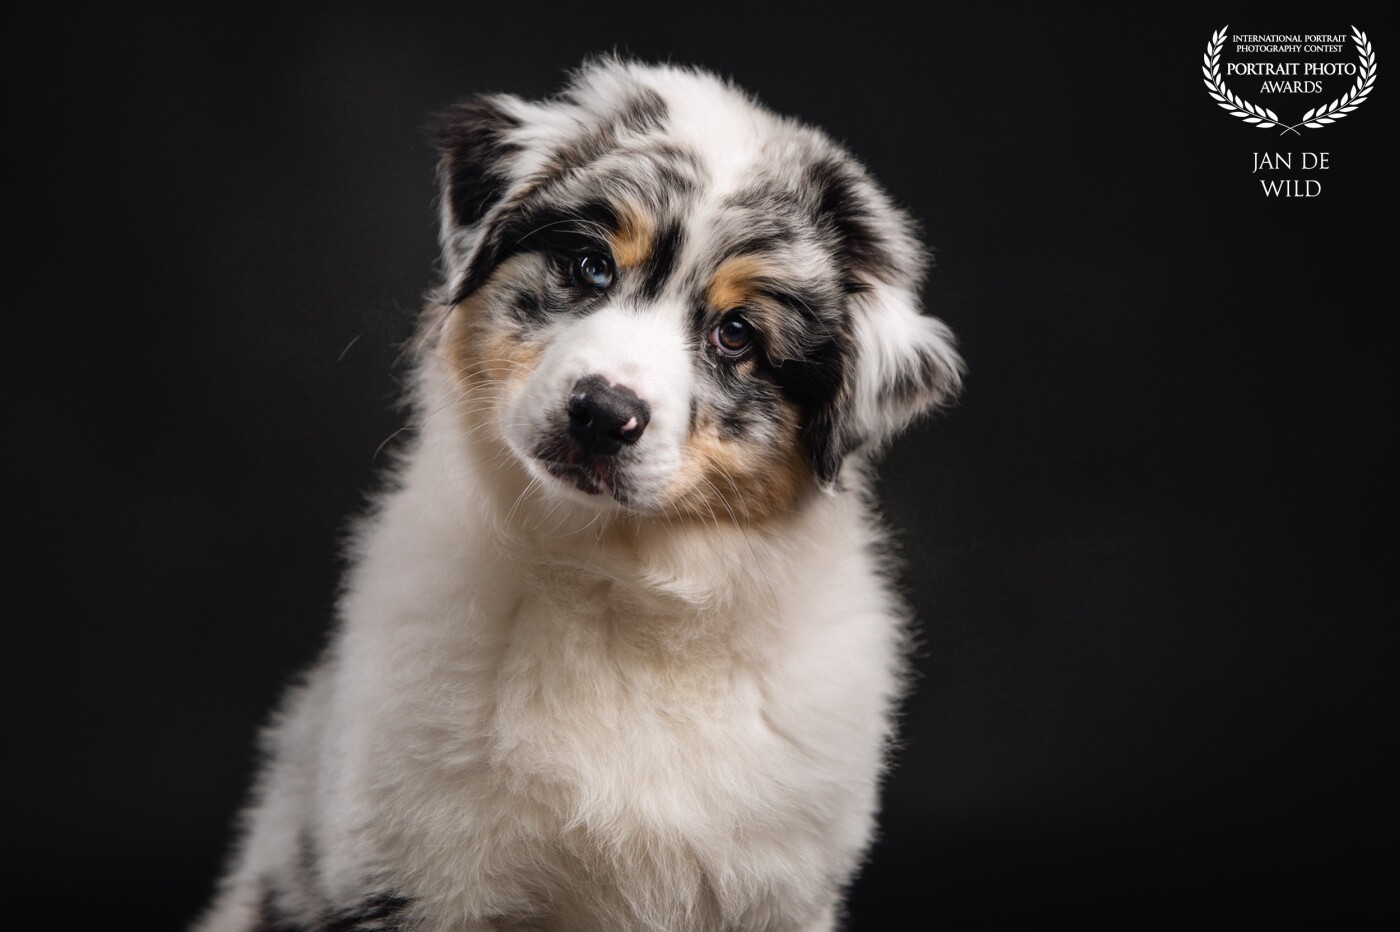 Had the opportunity to have this very cute puppy in my studio. A beautiful Australian Shepard puppy staring in the lens, being playfull and fluffy :-)